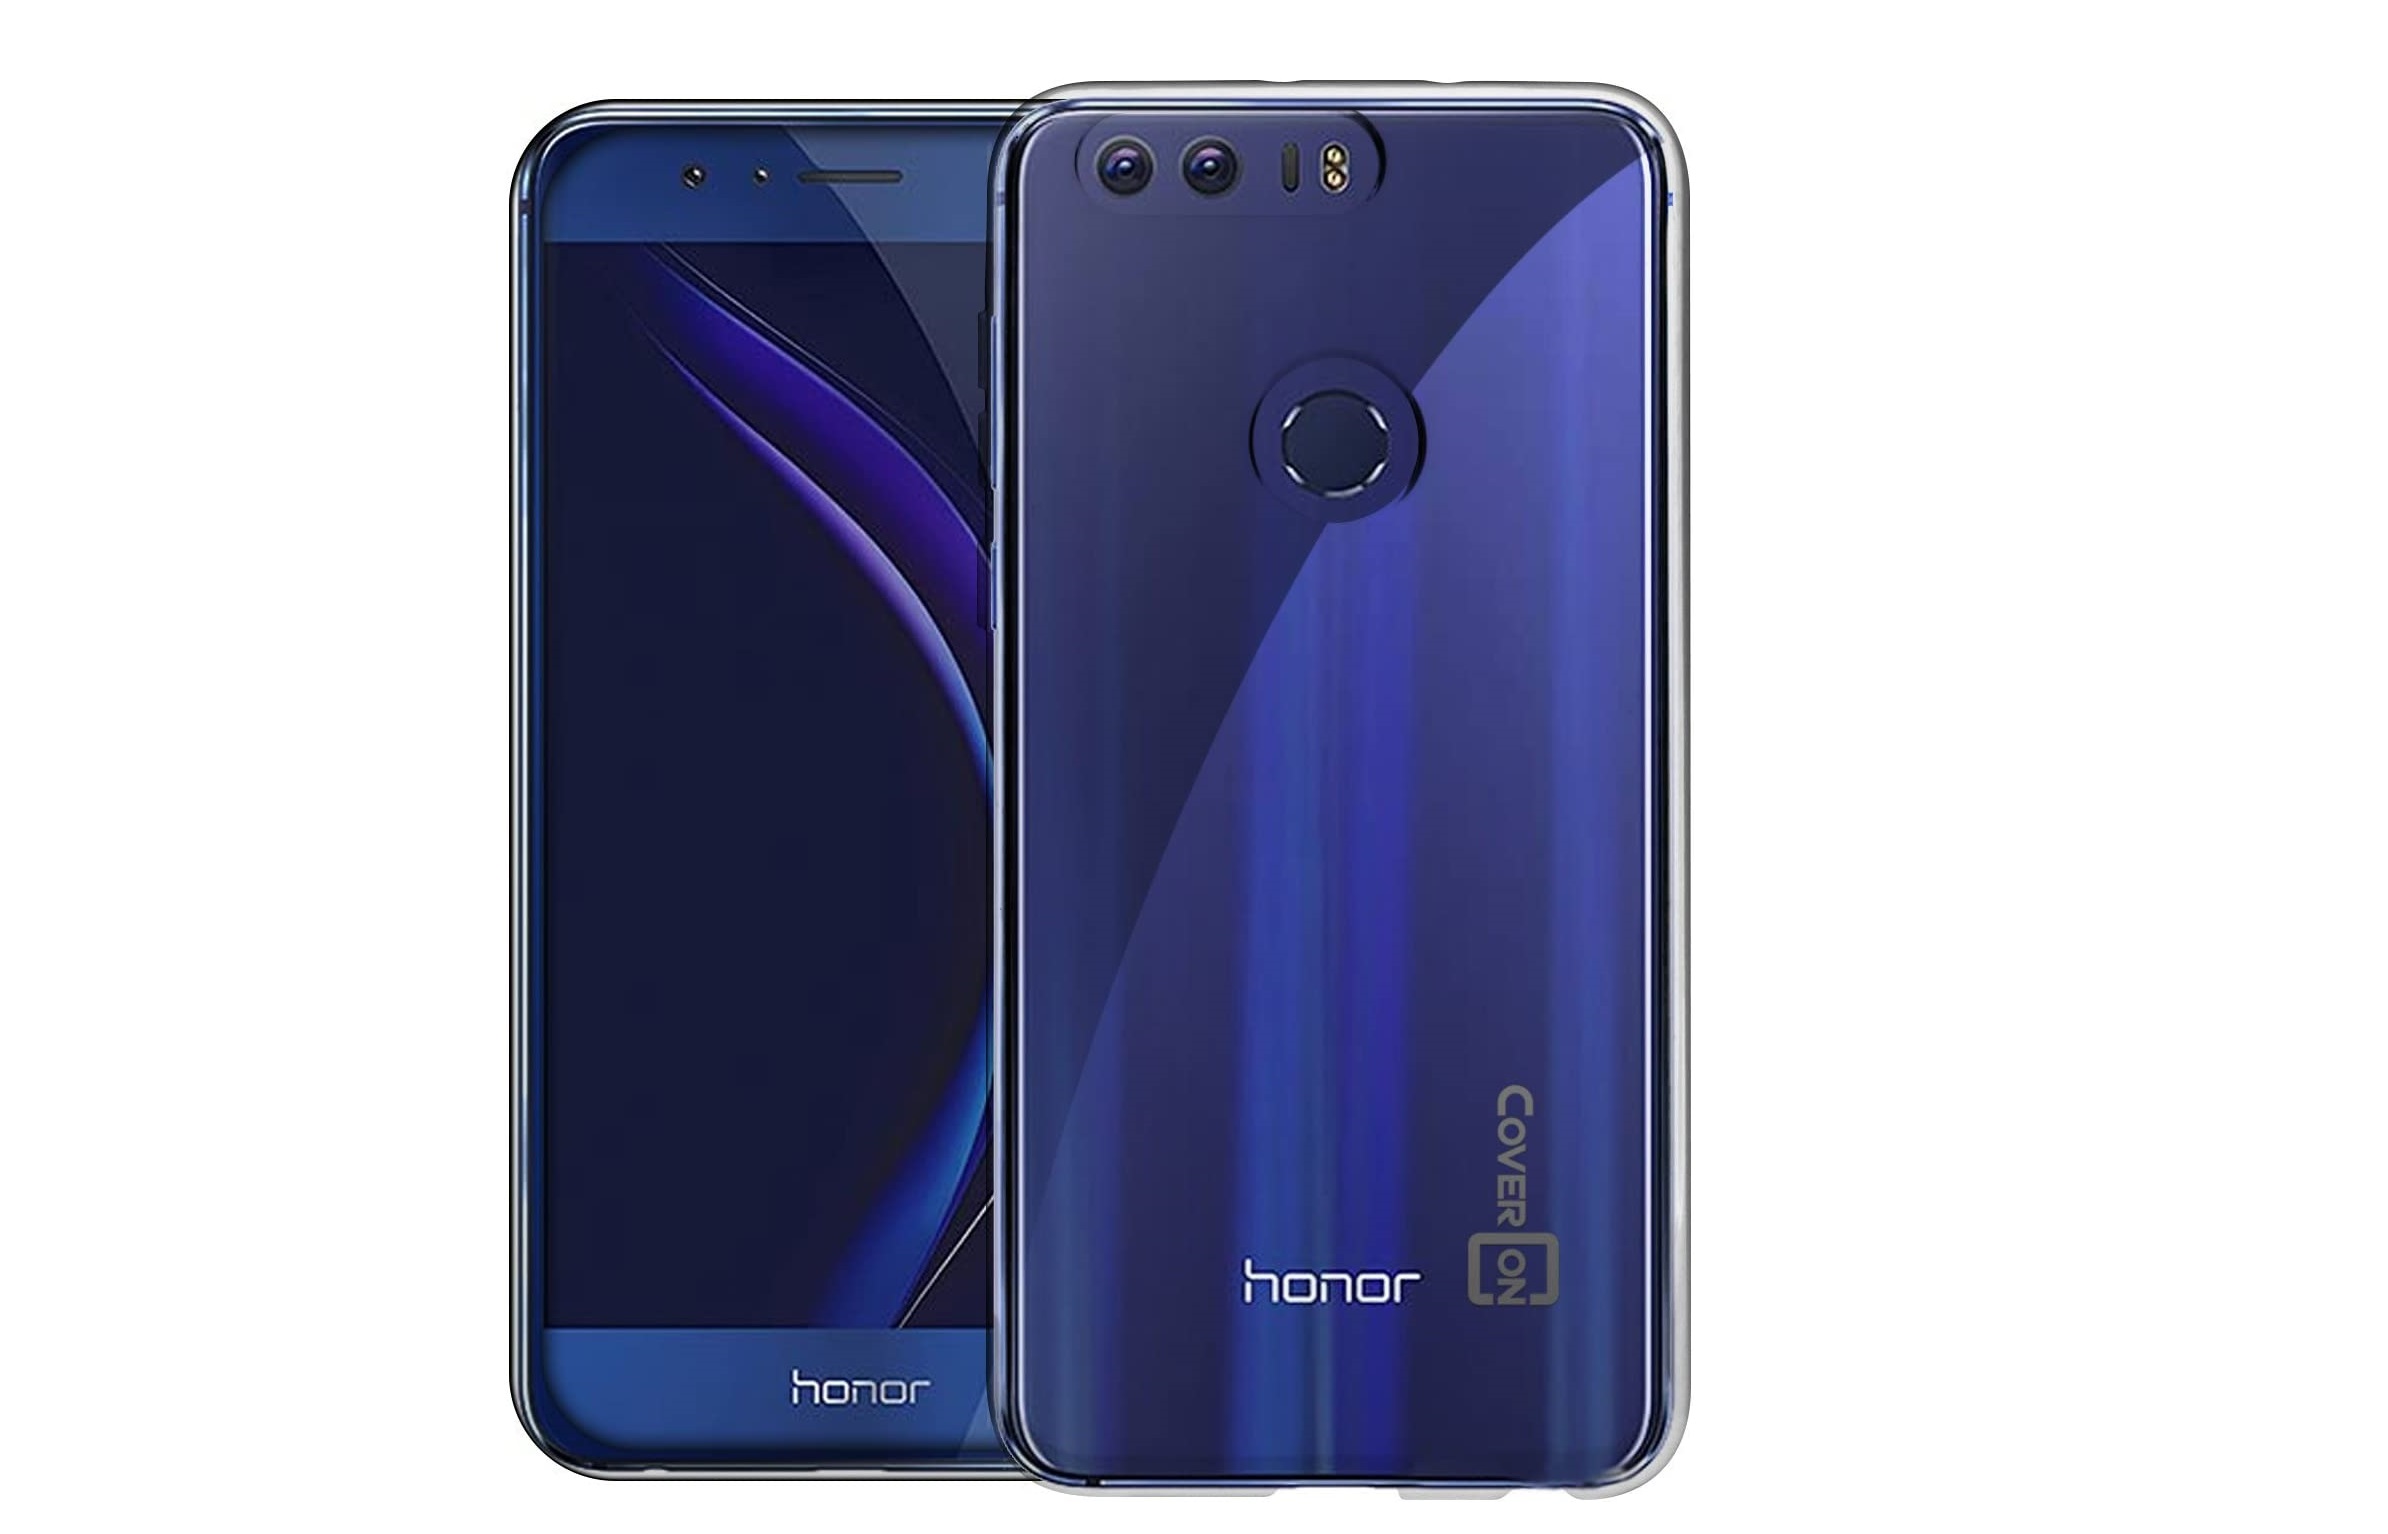 How to Root Honor 8 with Magisk without TWRP